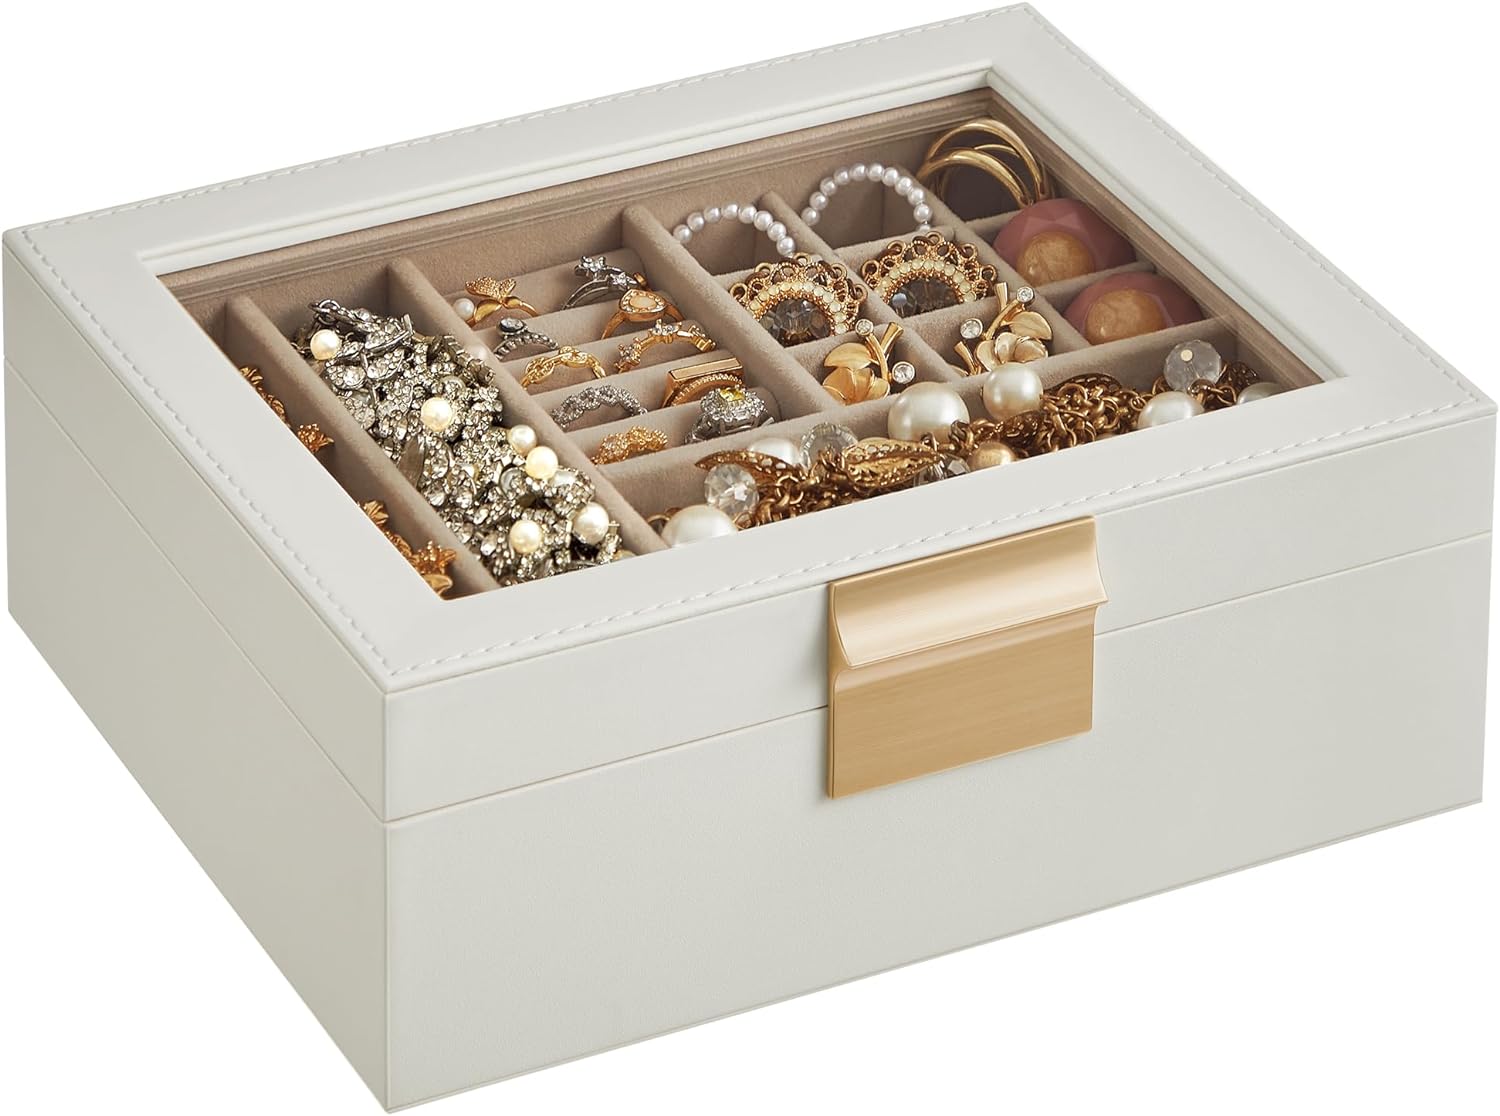 2 Layer Jewelry Box with Glass Lid, Gift for Loved Ones, Christmas Gifts, Cloud White and Metallic Gold